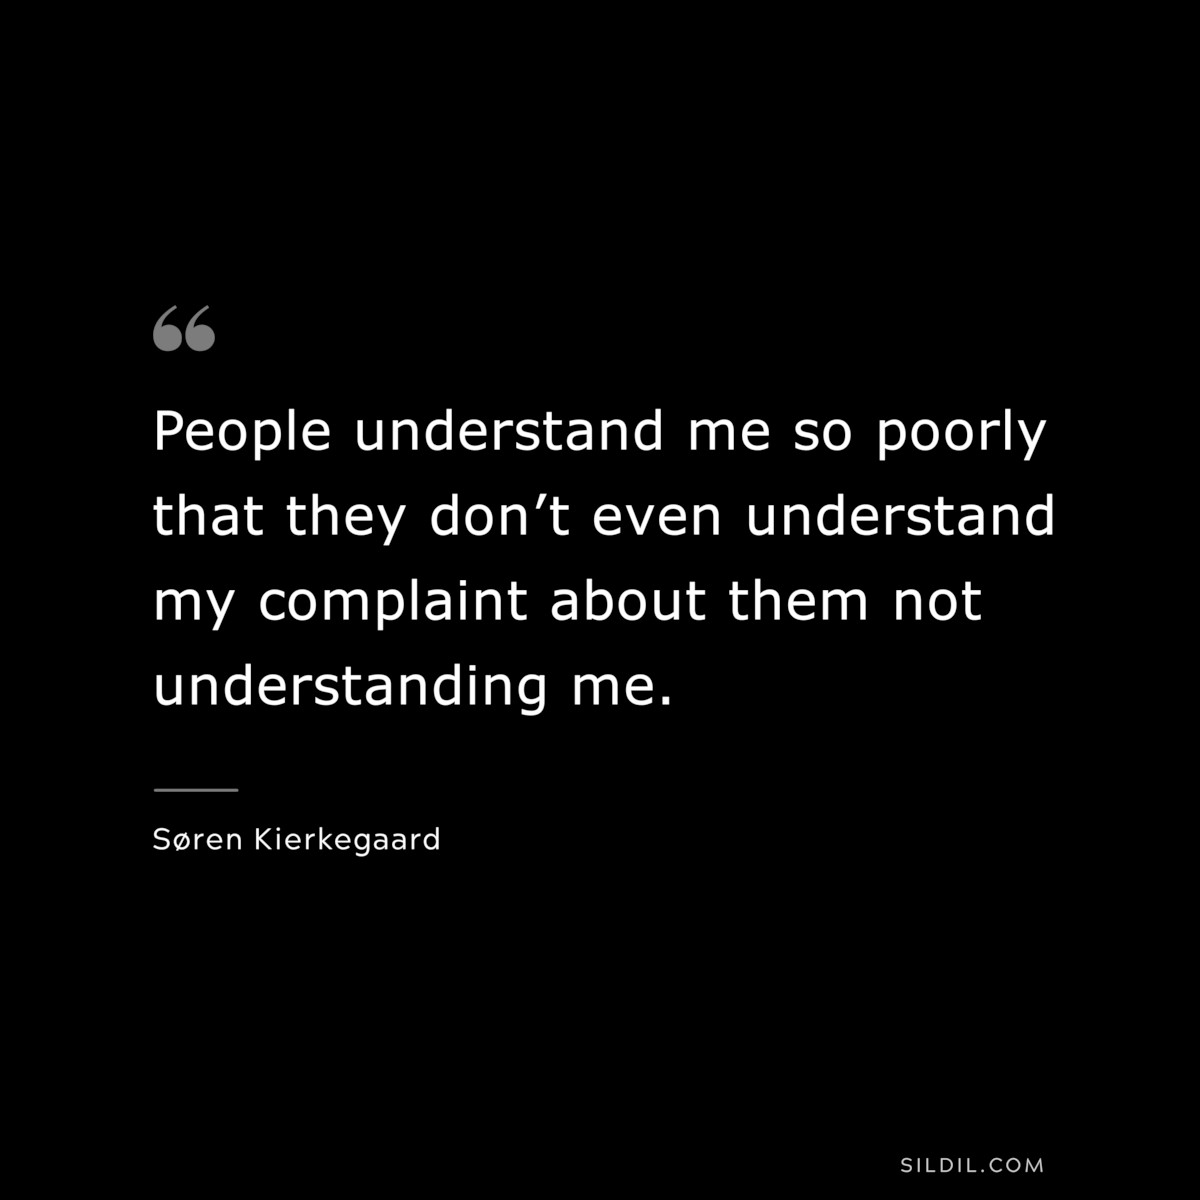 People understand me so poorly that they don’t even understand my complaint about them not understanding me. ― Søren Kierkegaard